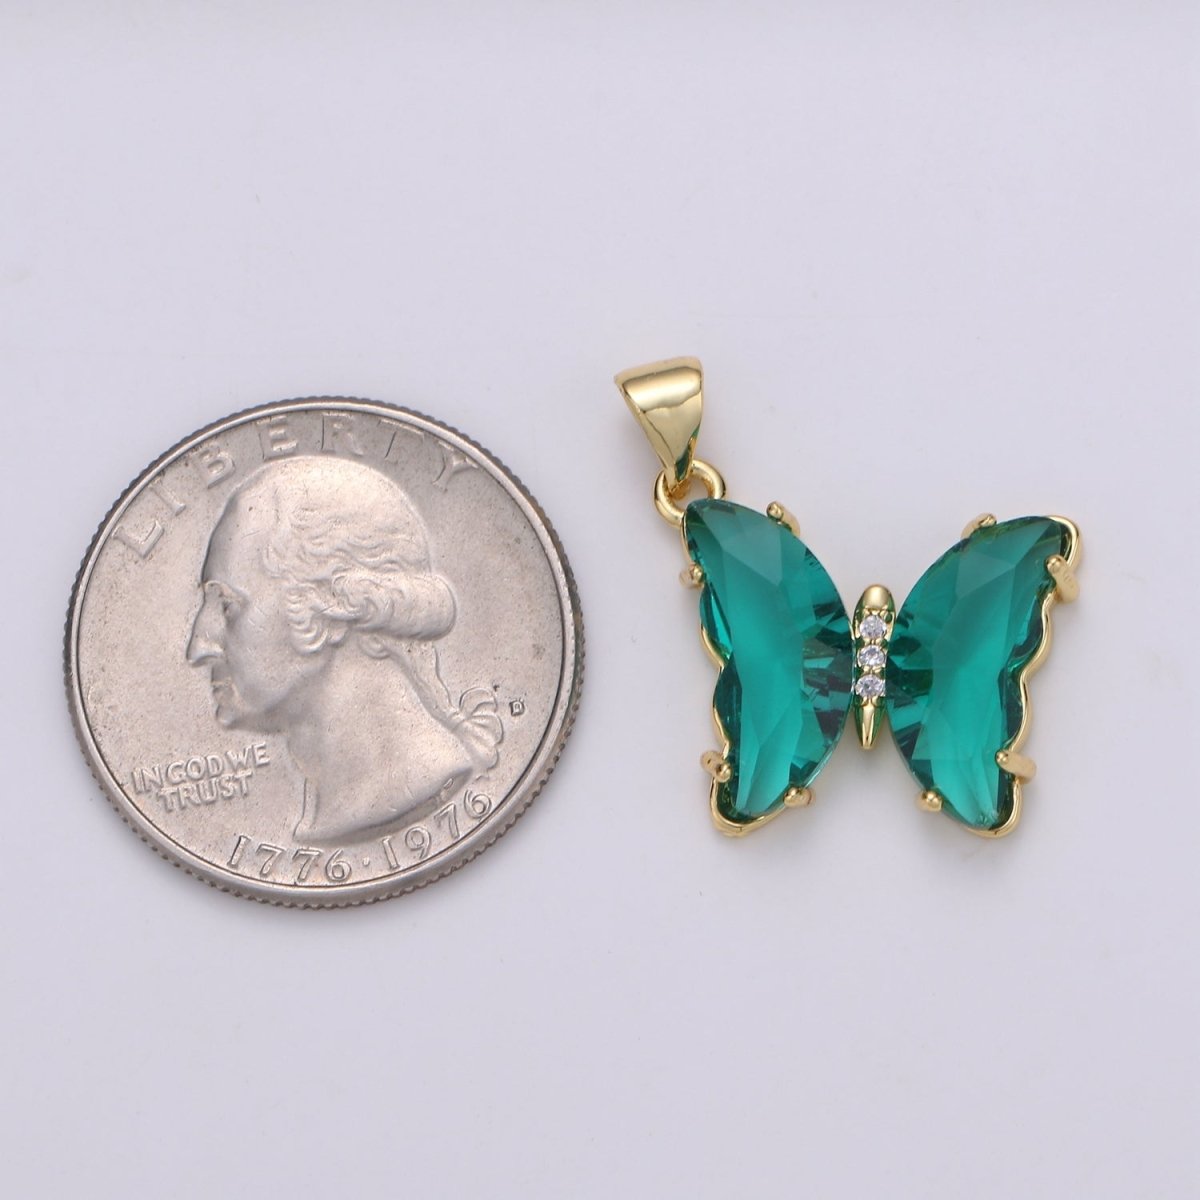 DEL- 1pc 20x17mm Wholesale Gold-Filled Mariposa Butterfly Pendant Charm with Clear Glass Wings, Charms for Necklace Bracelet Anklet Making - DLUXCA